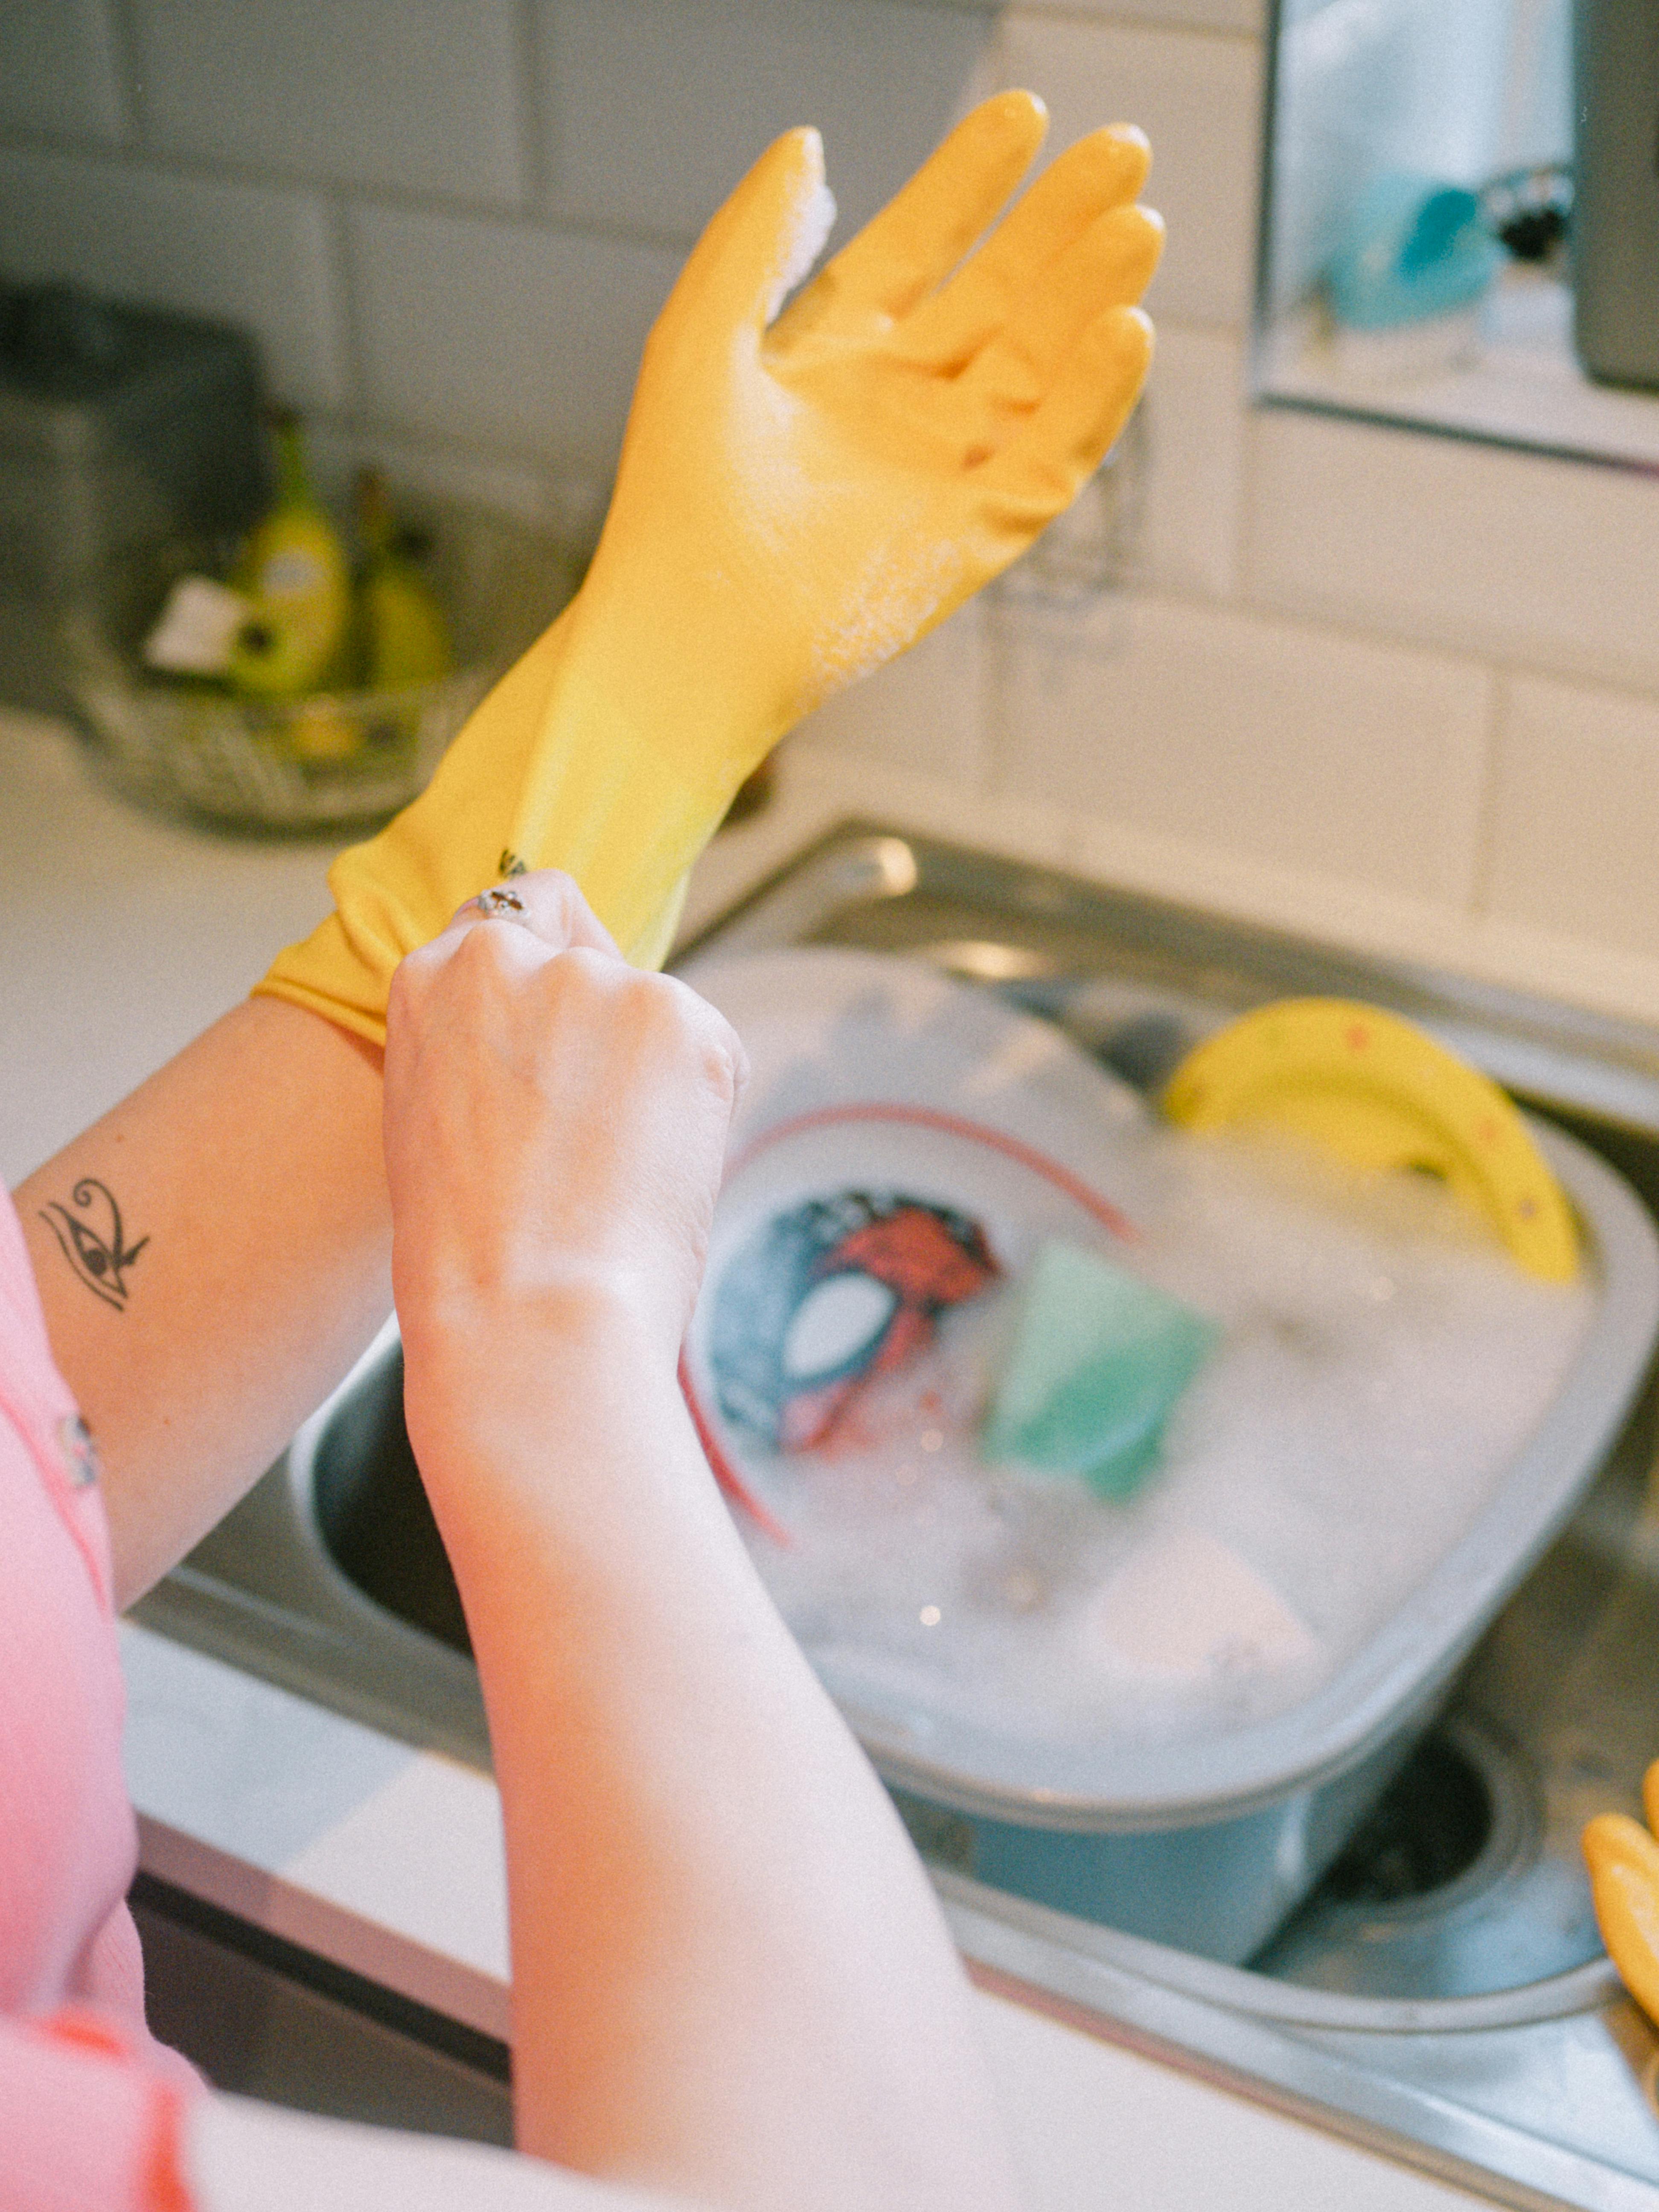 A woman wearing gloves ready to wash dishes | Source: Pexels